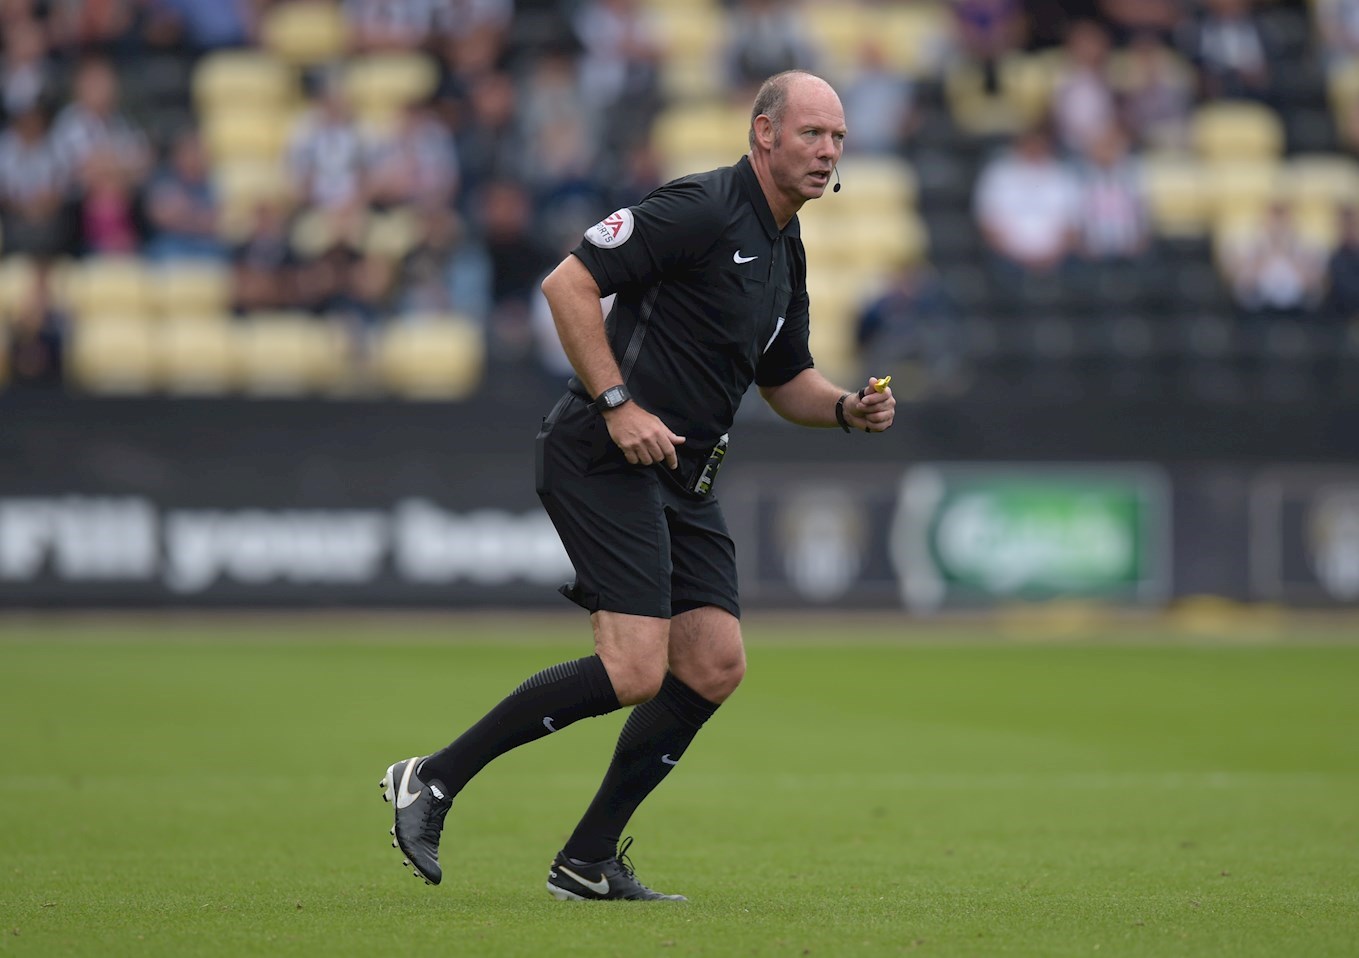 MATCH OFFICIALS: Oldham Athletic vs. Morecambe - News - Oldham Athletic